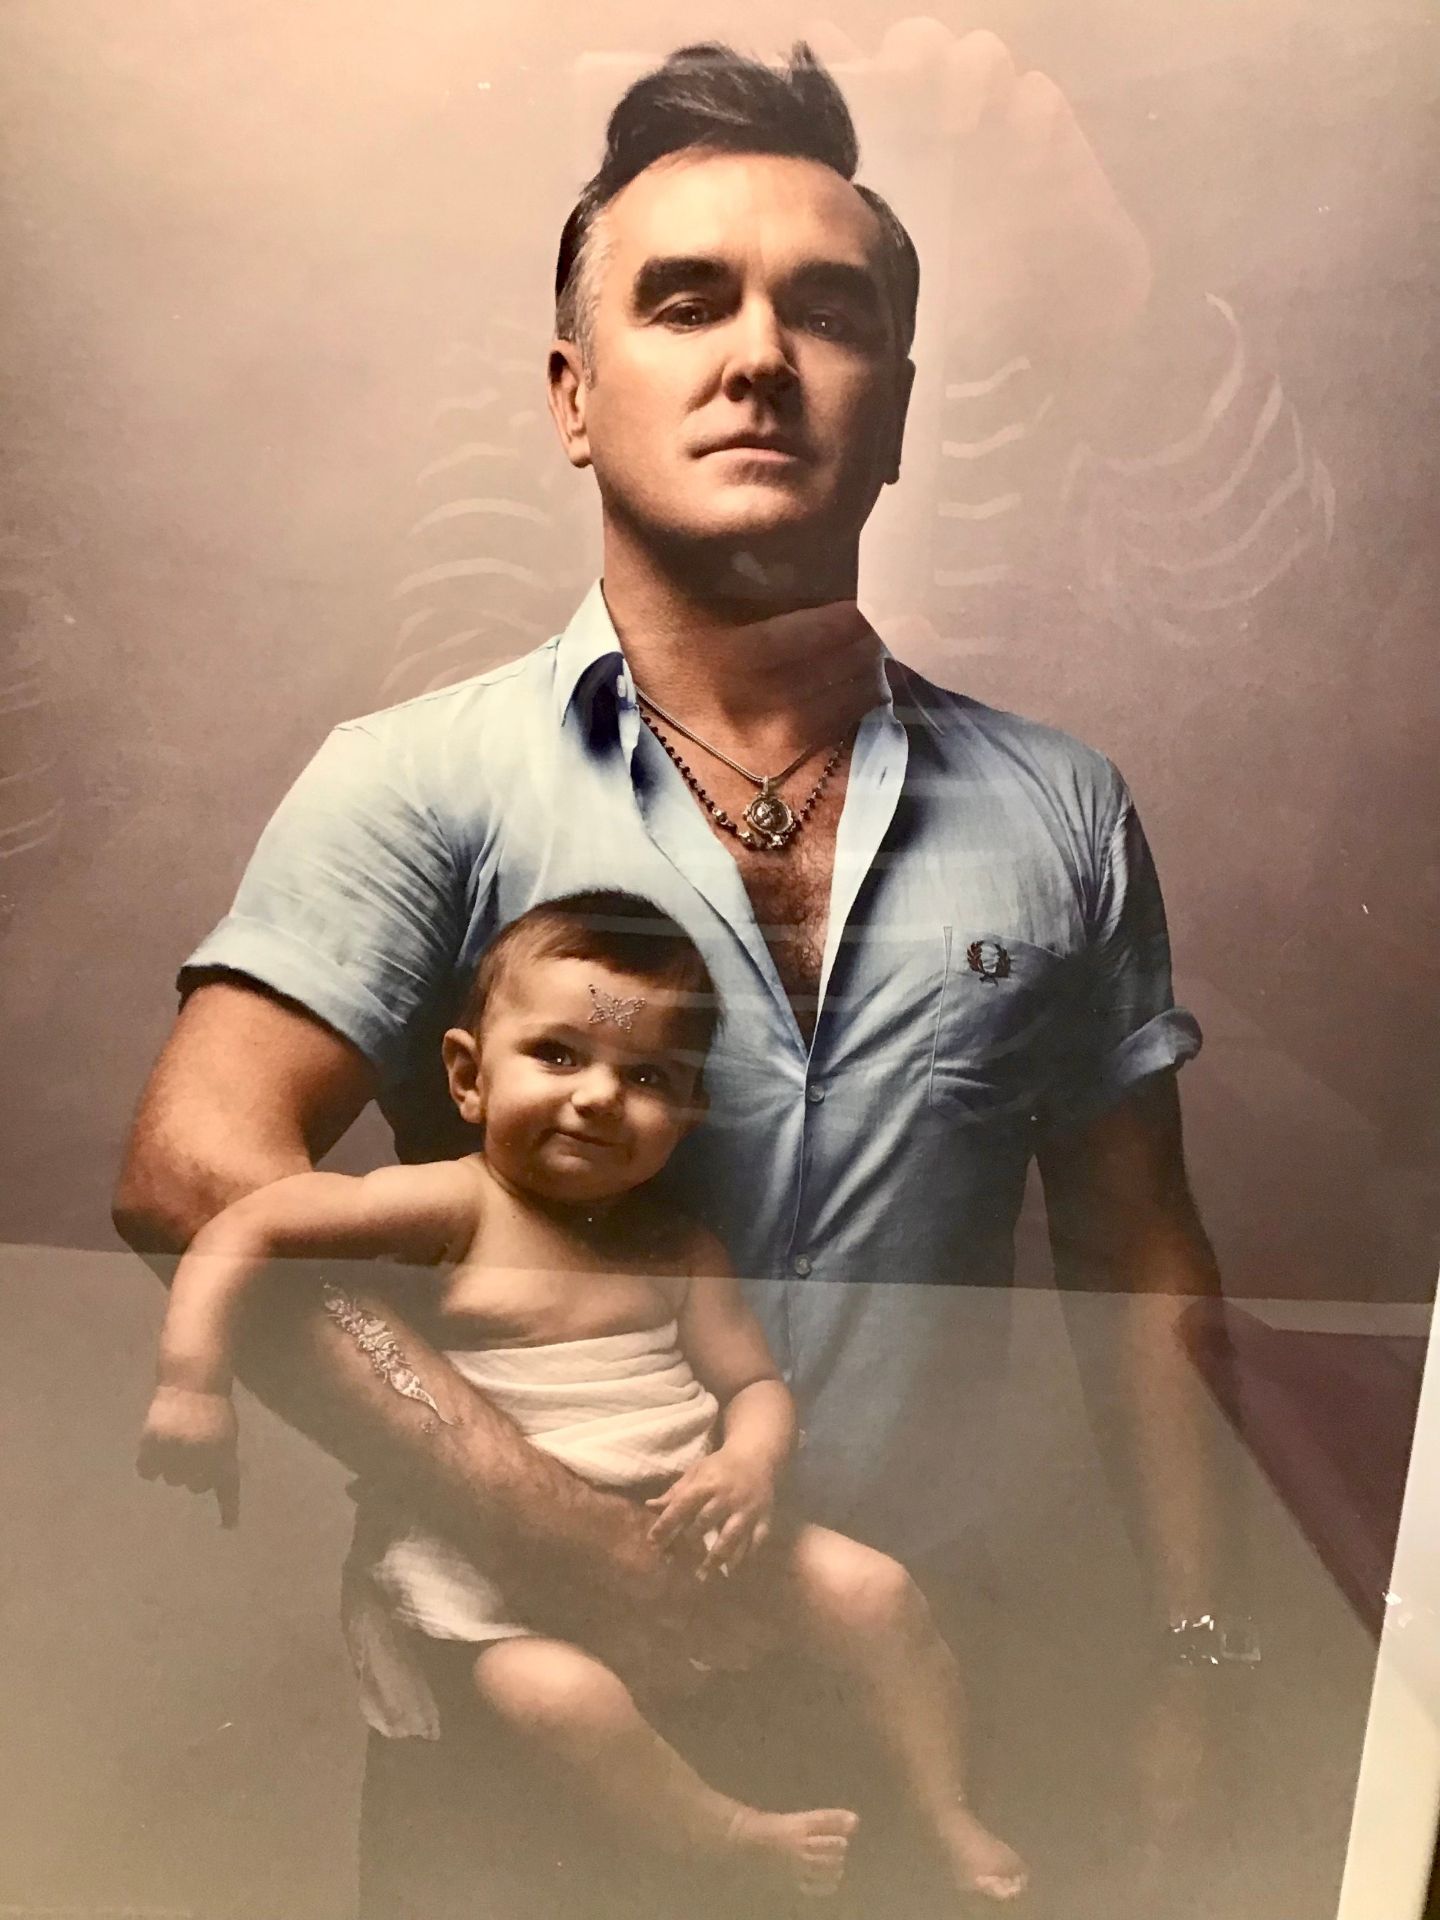 MORRISSEY WITH BABY POSTER. From the album cover ‘Years Of Refusal’ this framed poster measures 57 x - Image 2 of 2